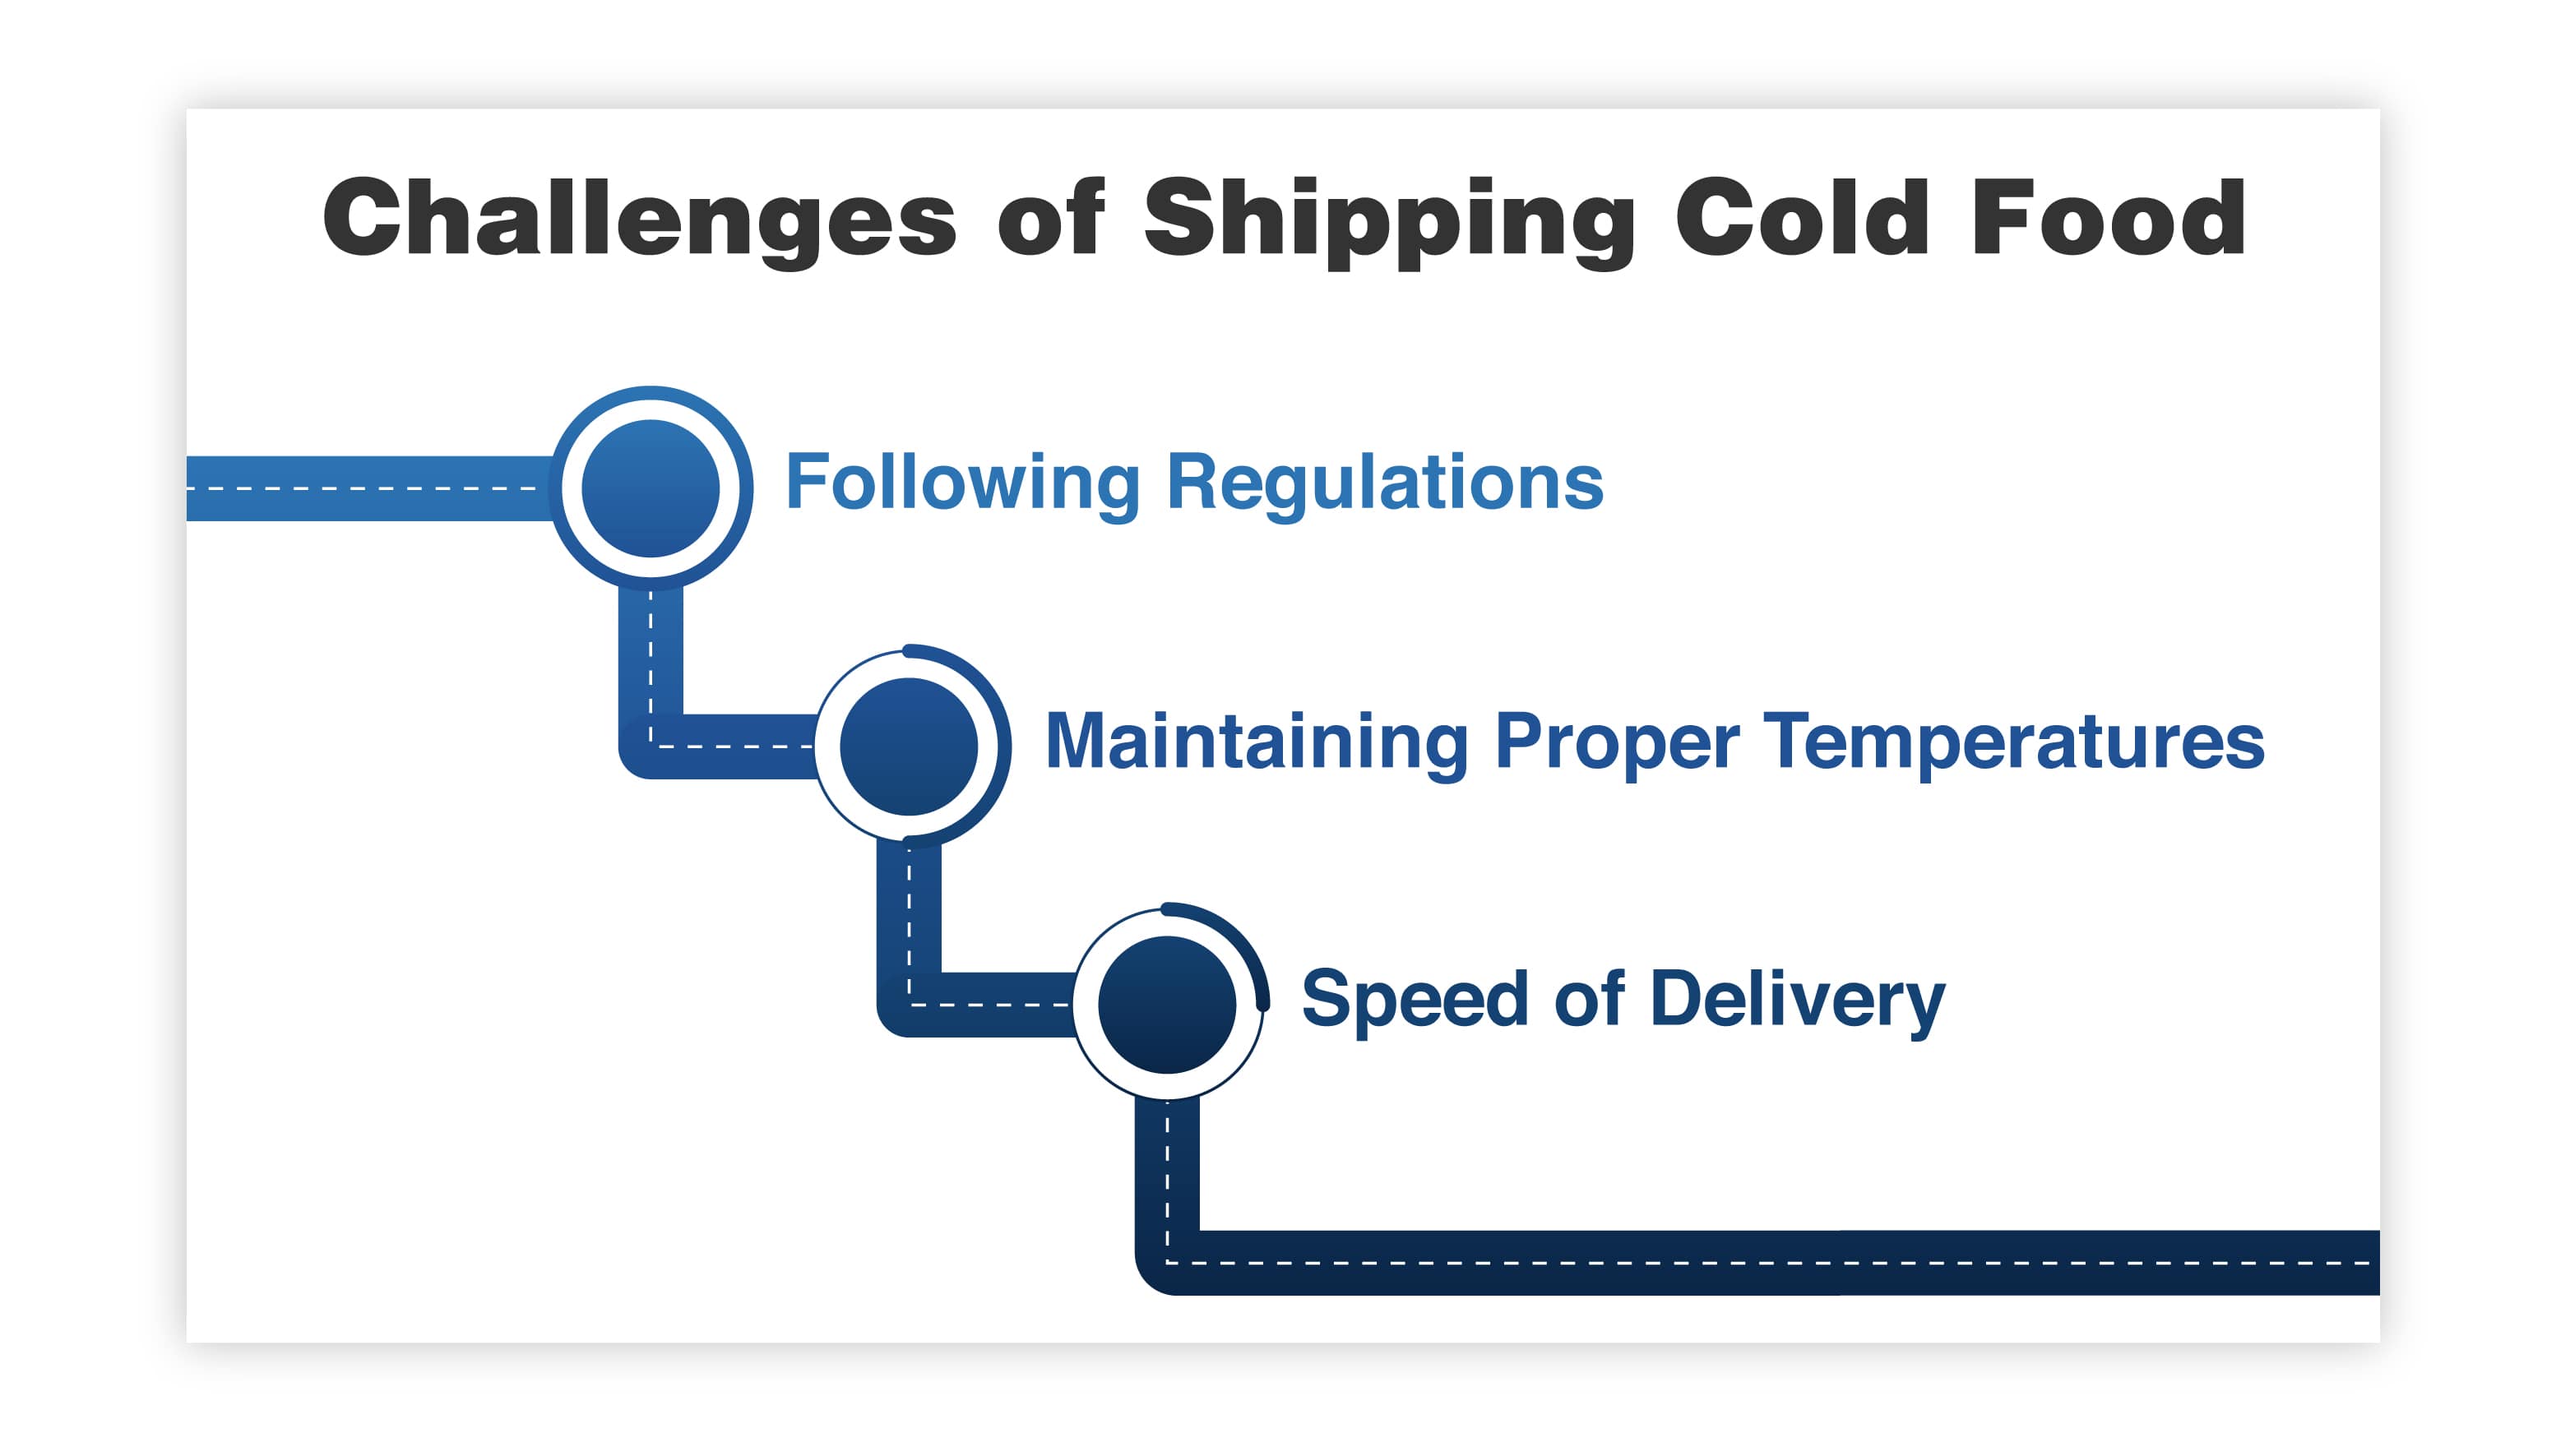 What Are Some Challenges of Shipping Cold Food?